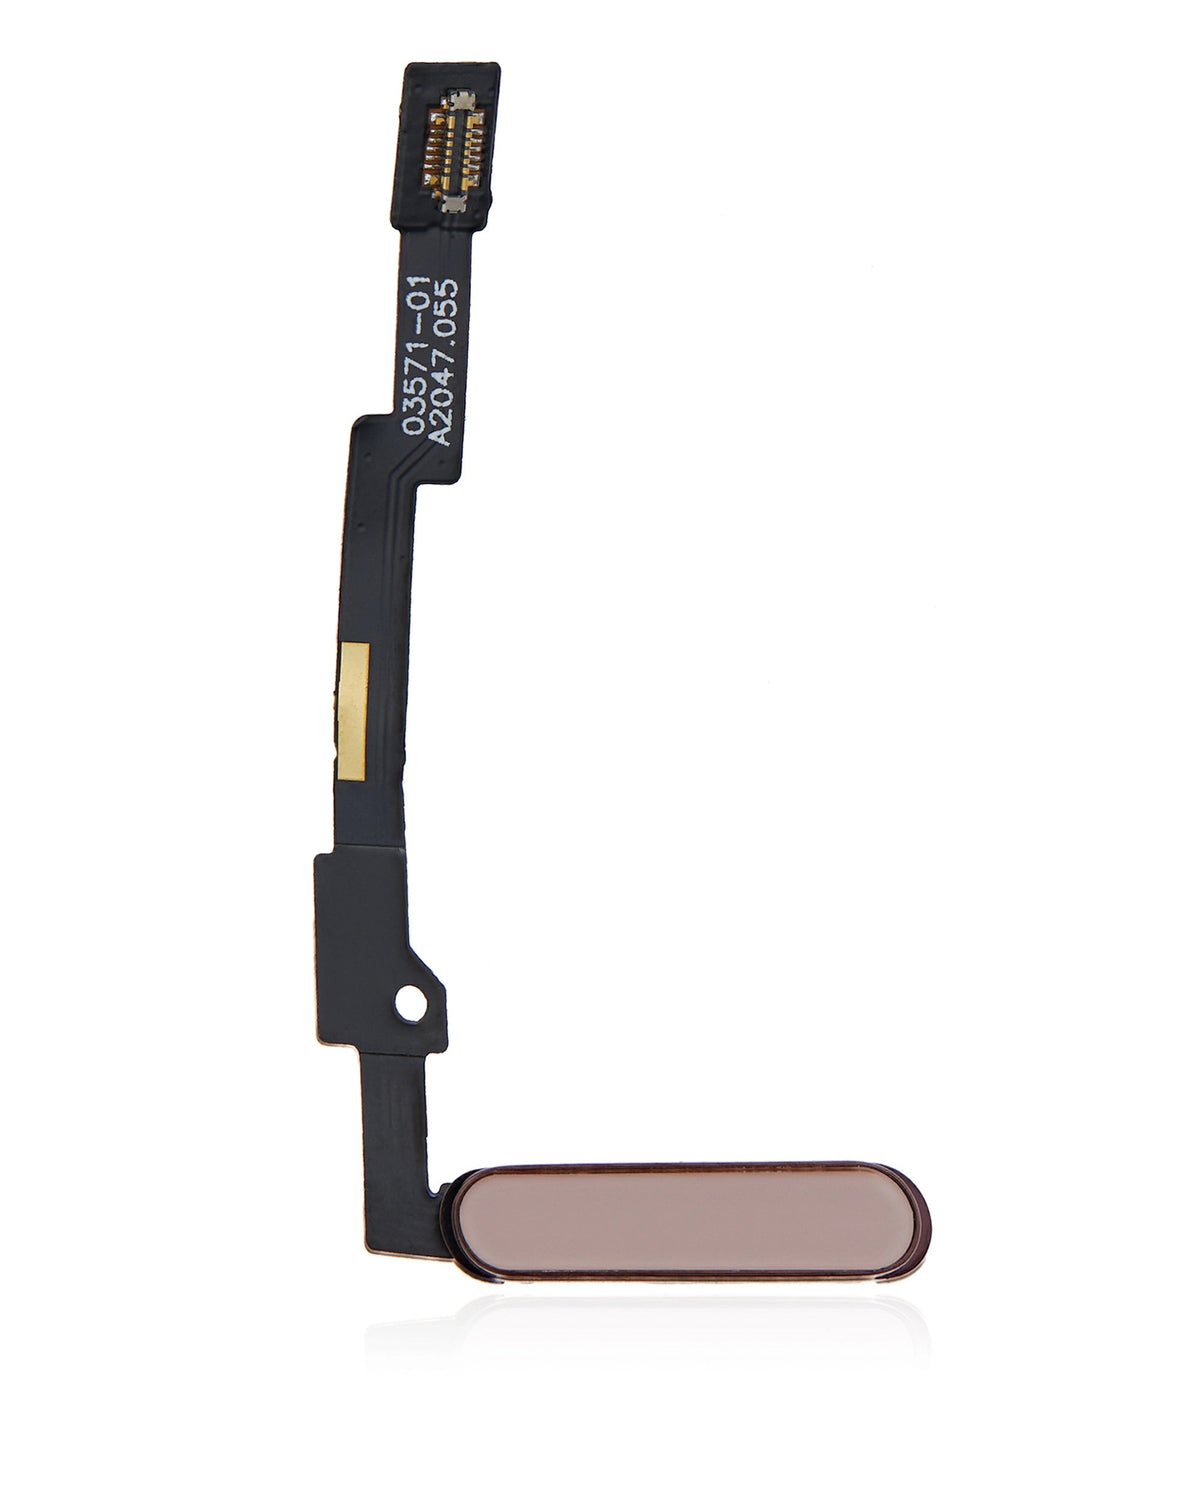 PINK POWER BUTTON FLEX CABLE FOR IPAD MINI 6